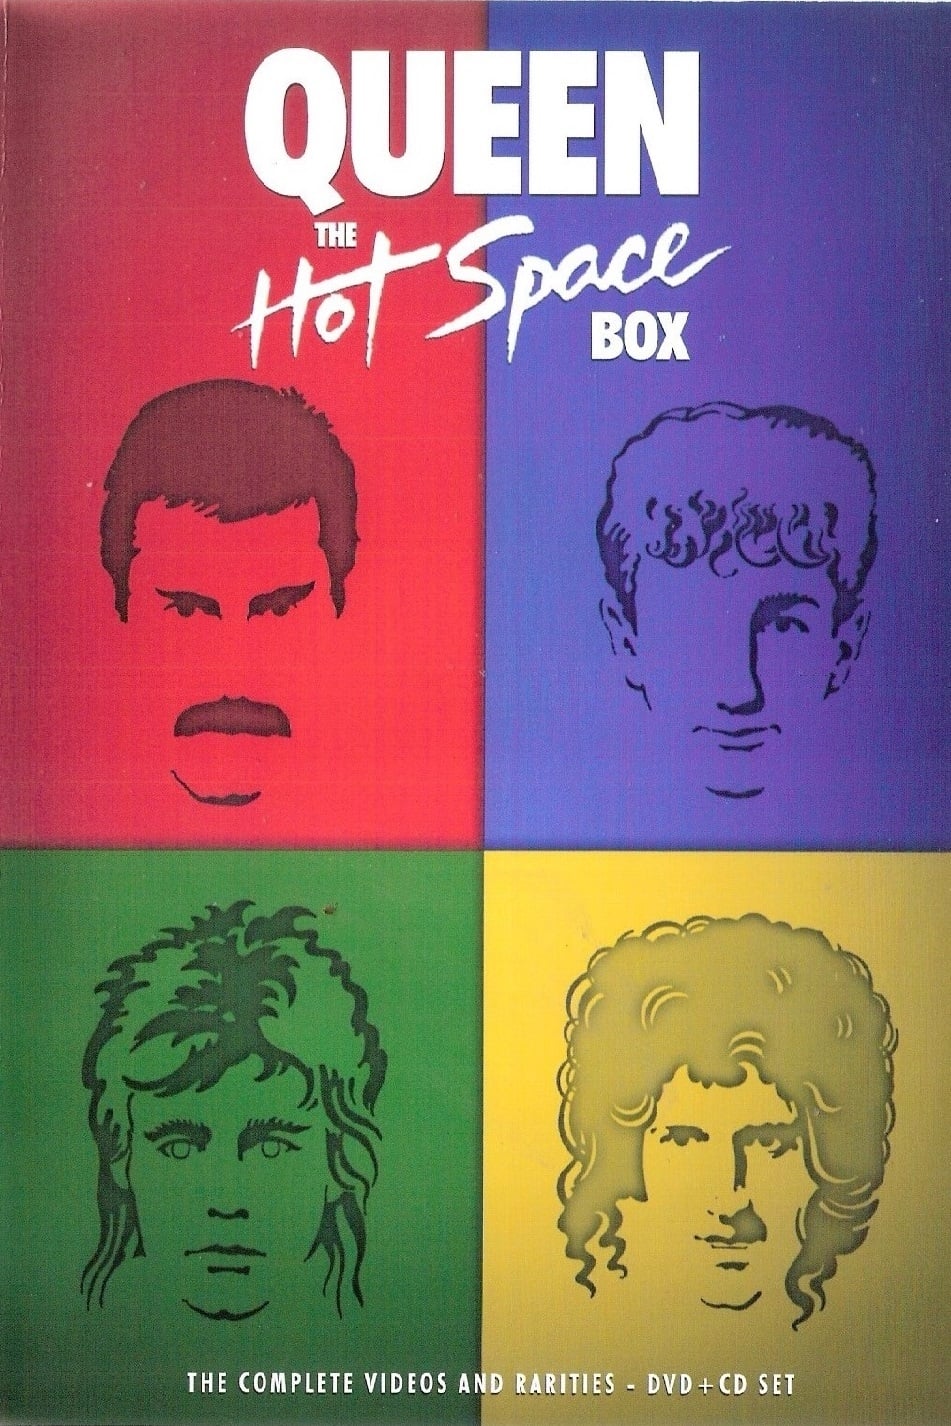 QUEEN - The Hot Space Box